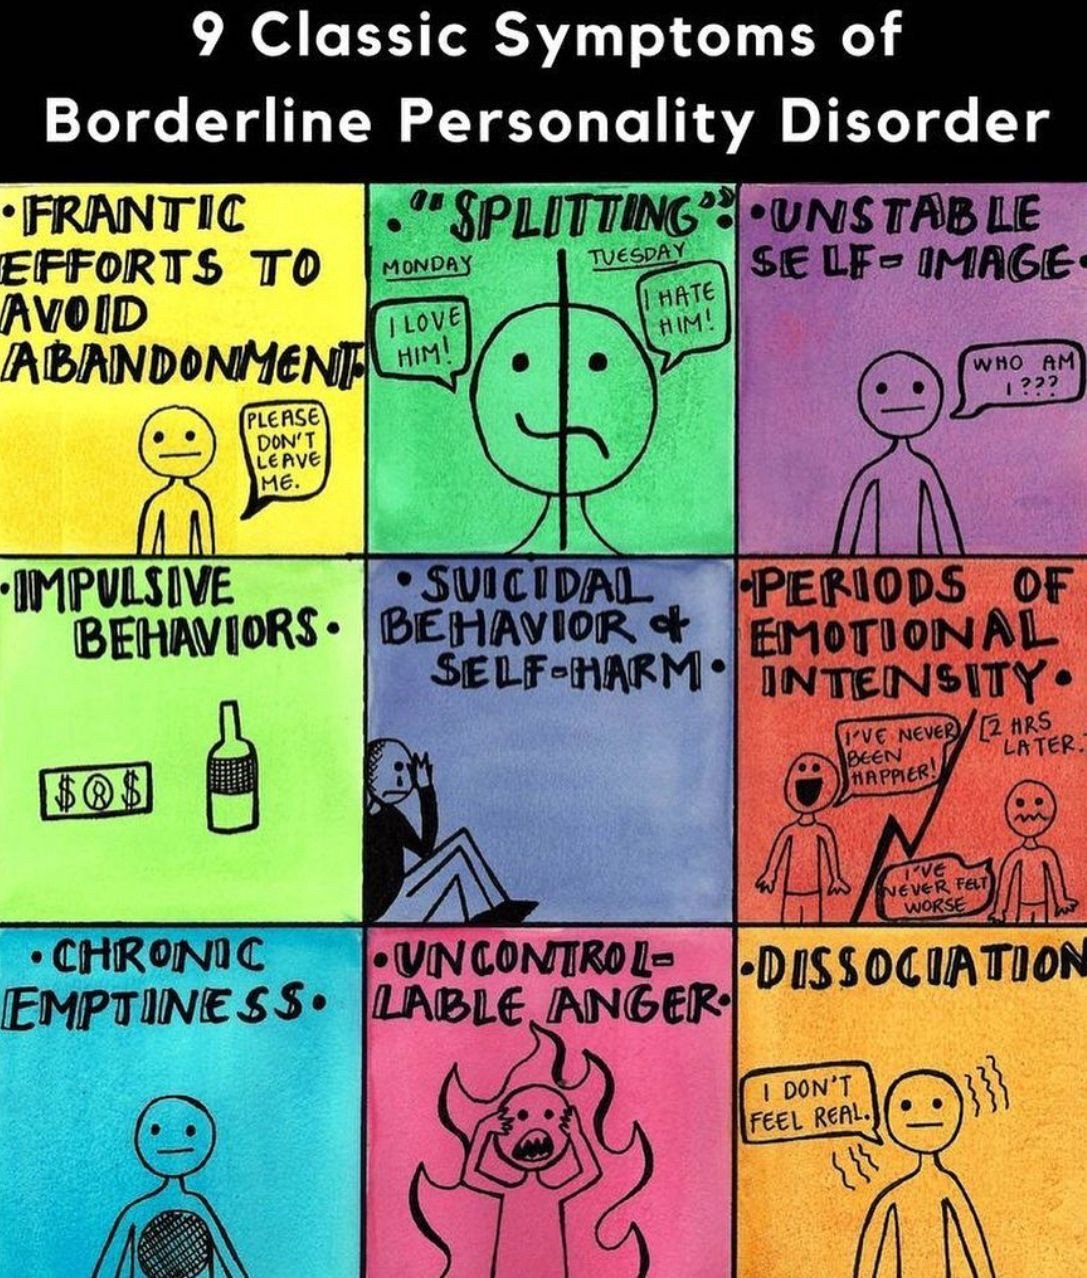 What Can We Do About Borderline Personality Disorder?